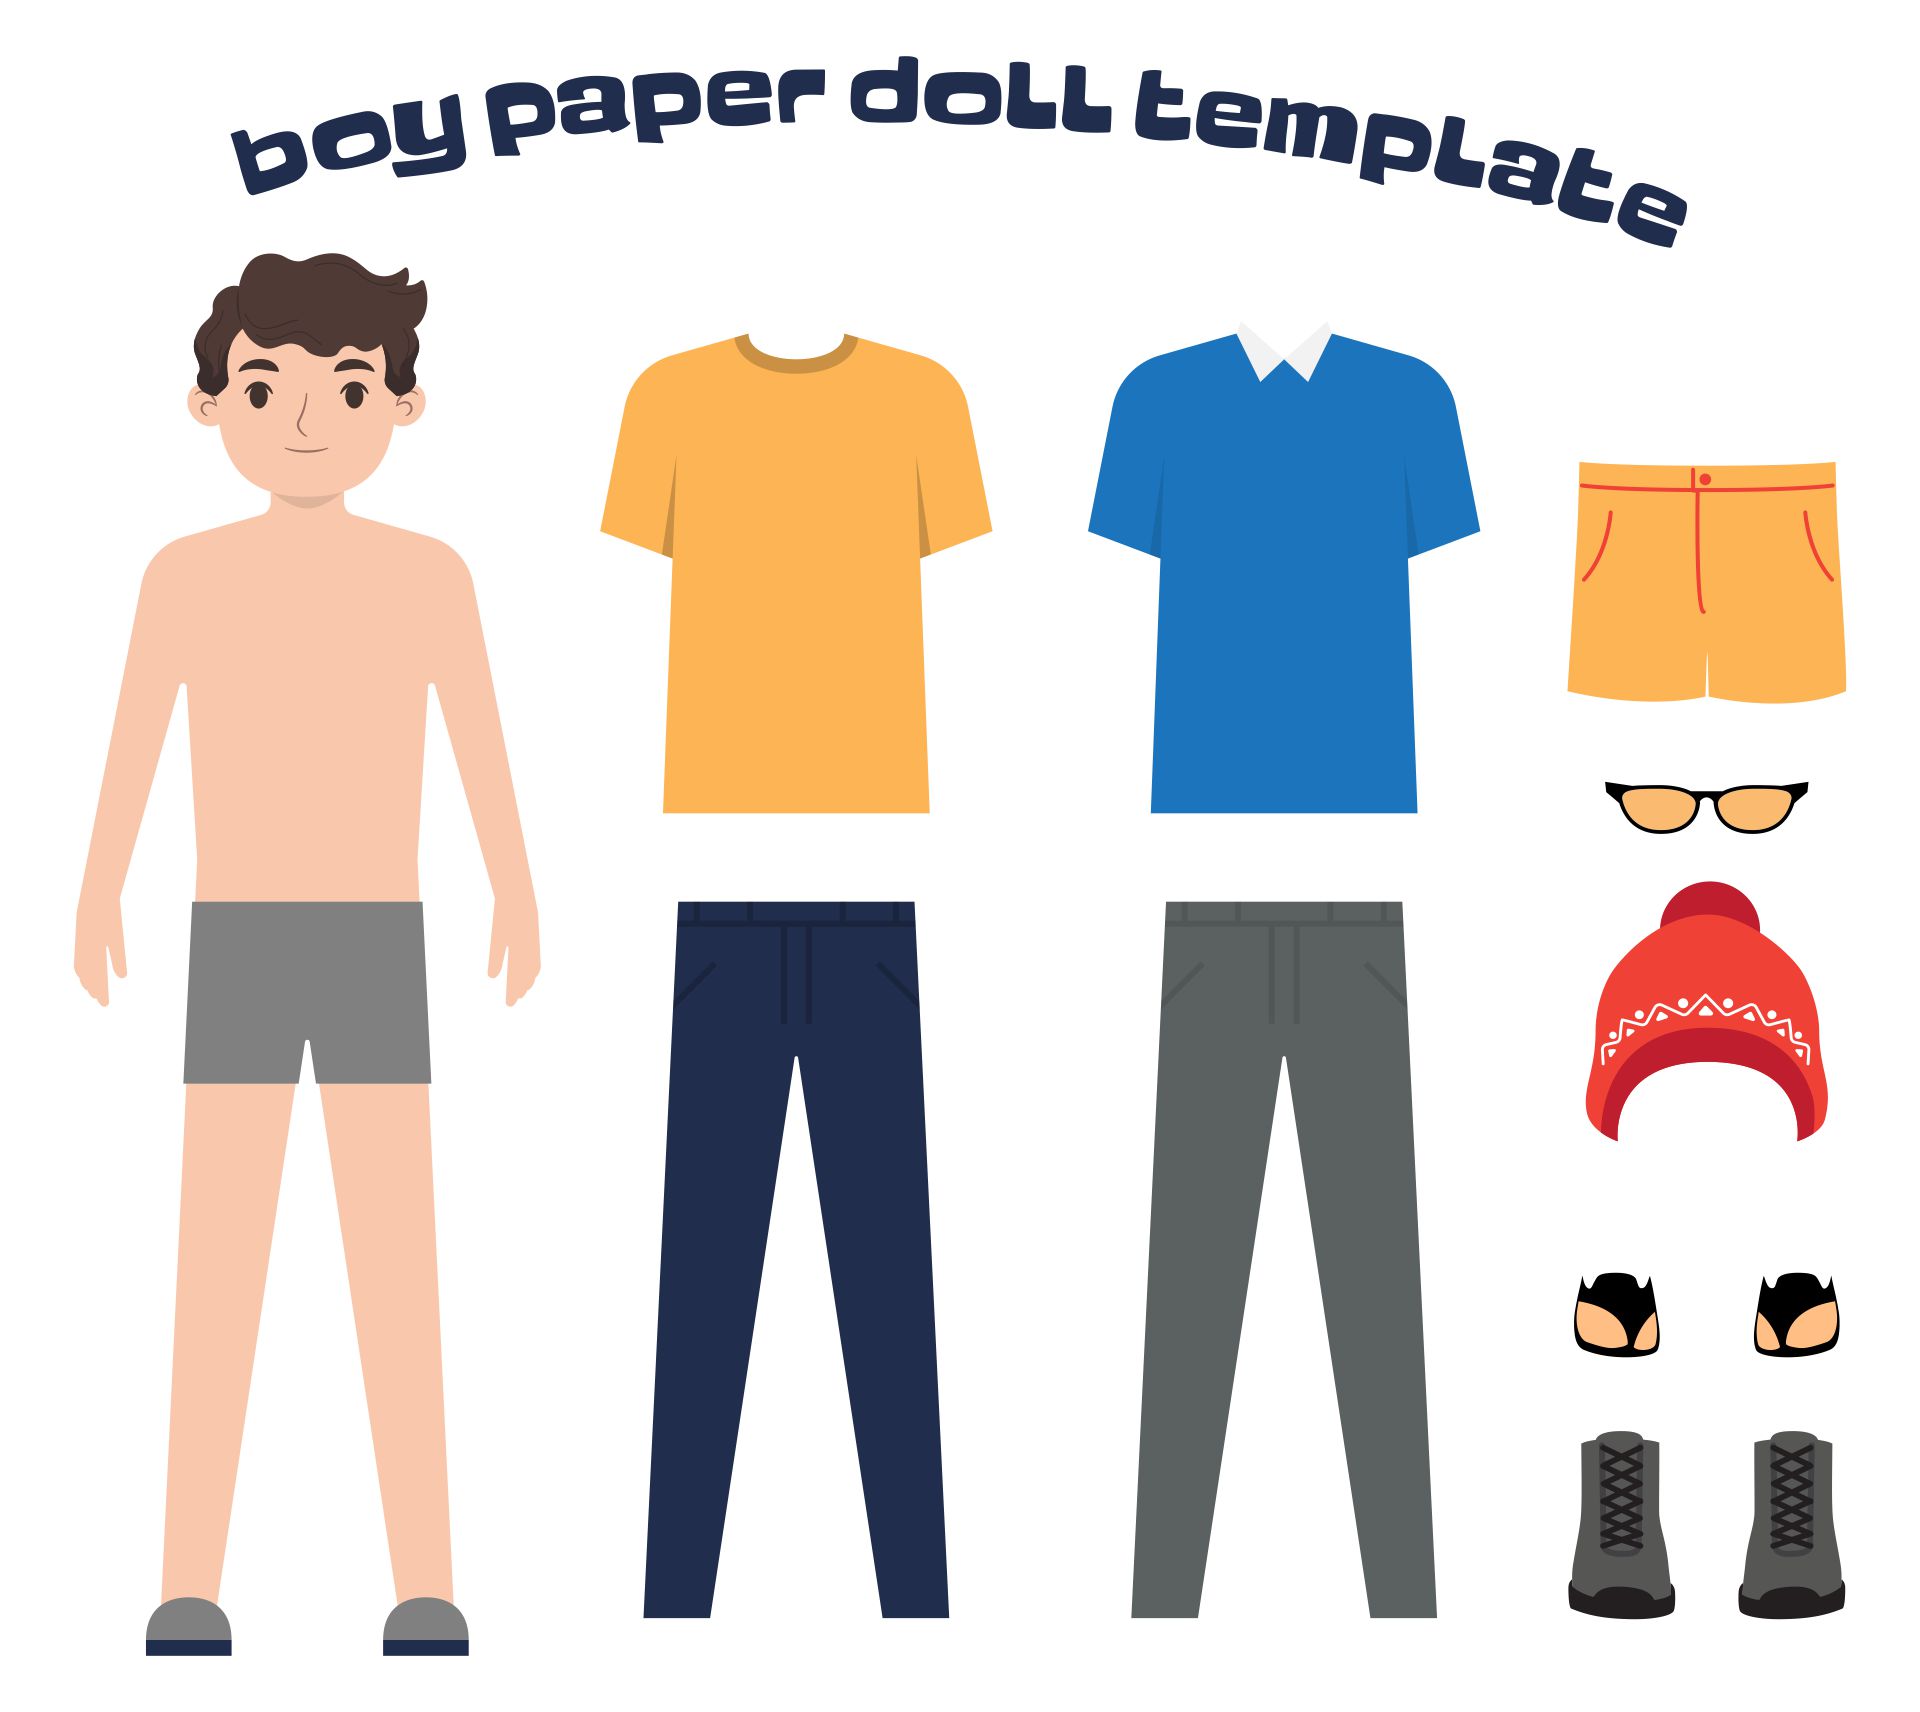 Printable Templates For Boy Paper Dolls